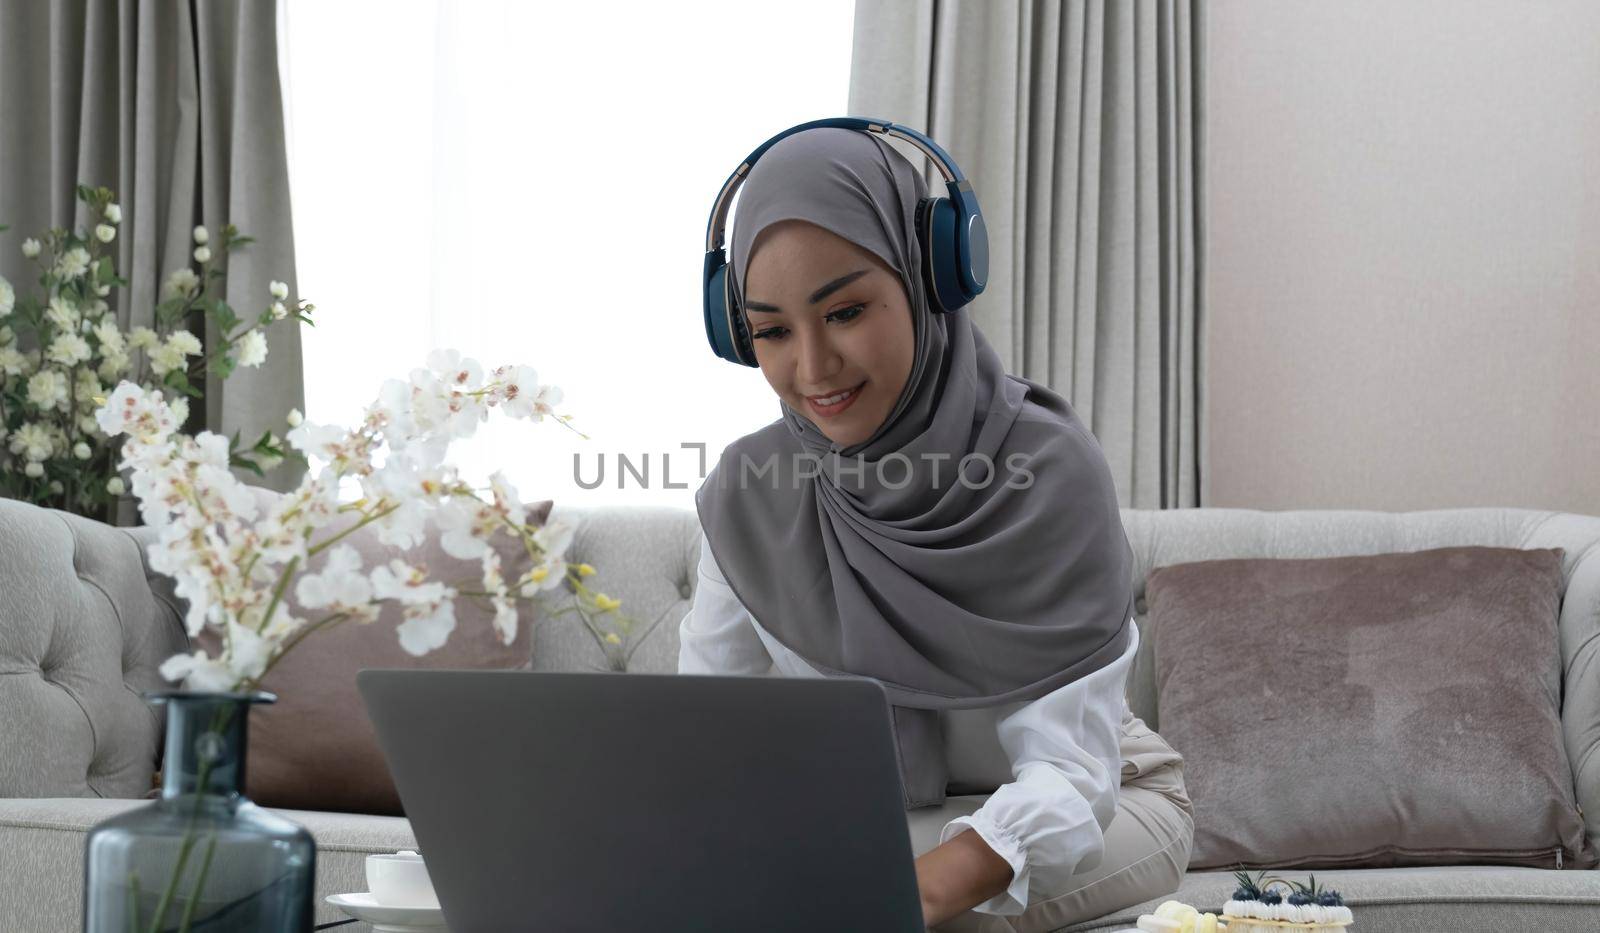 Online Tutoring. Young muslim woman teacher having video call with students, talking at laptop camera, sitting on couch at home.